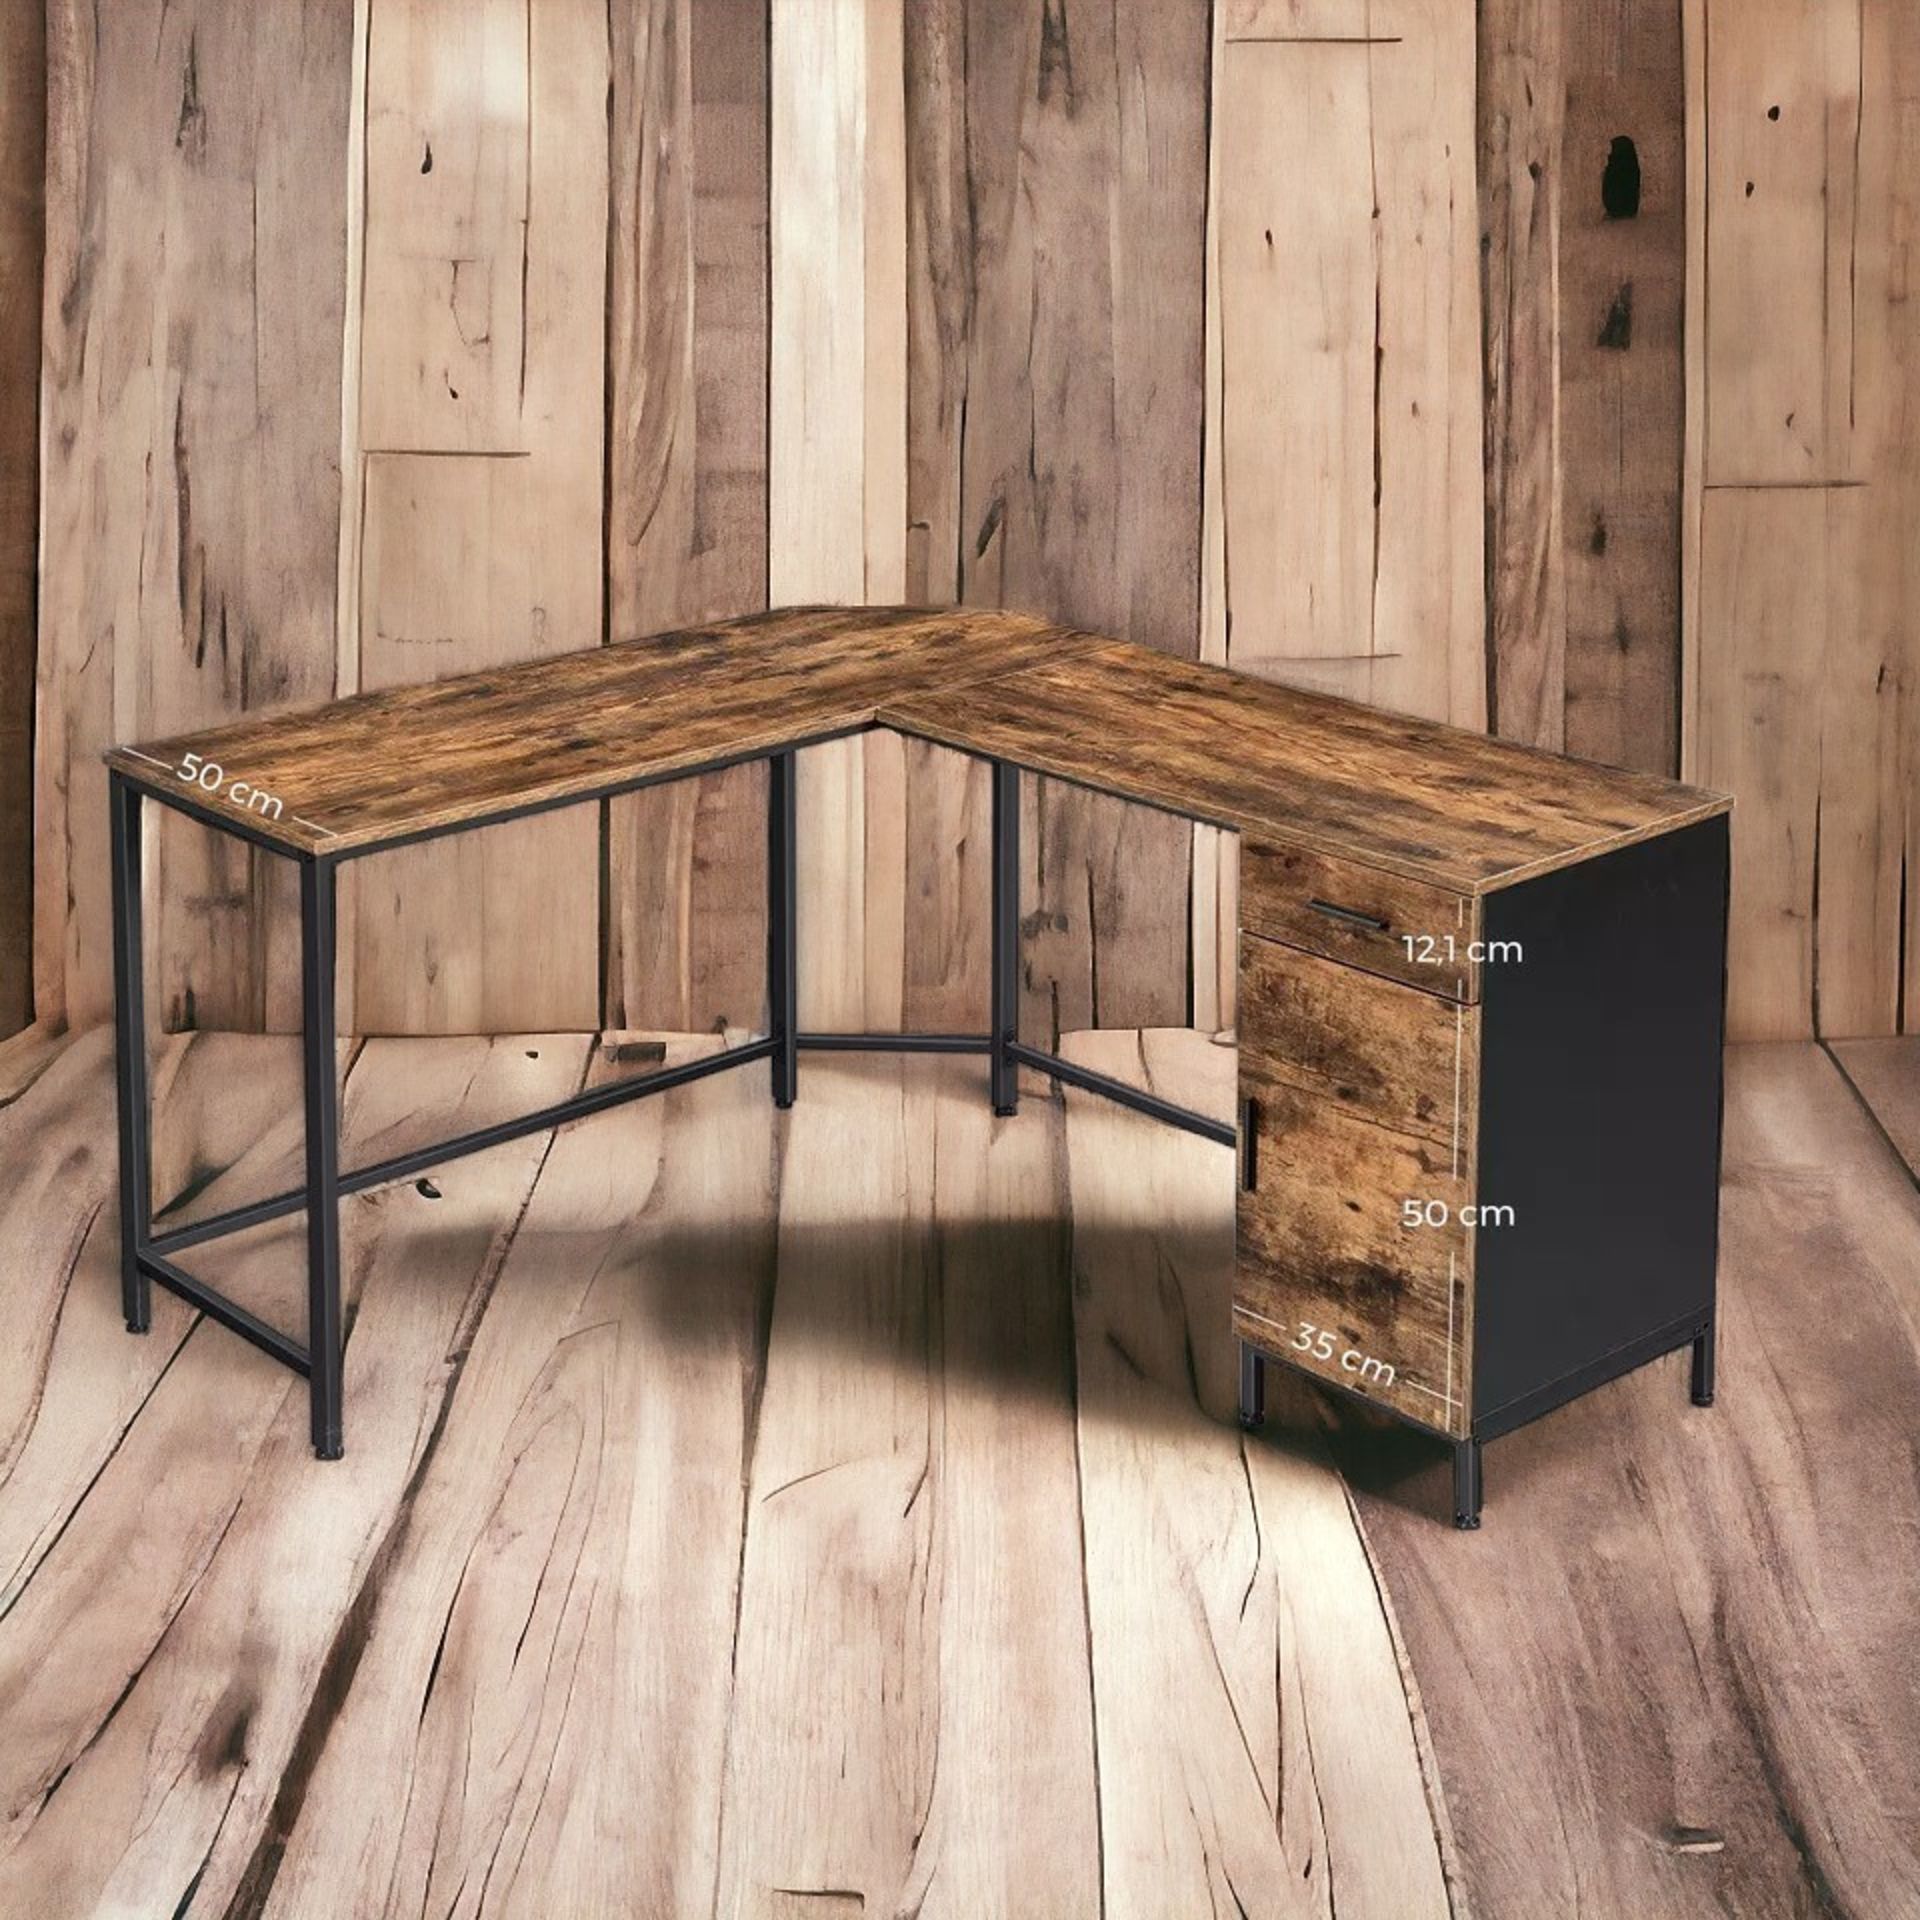 FREE DELIVERY - BRAND NEW CORNER DESK L-SHAPED COMPUTER DESK SPACE-SAVING RUSTIC BROWN